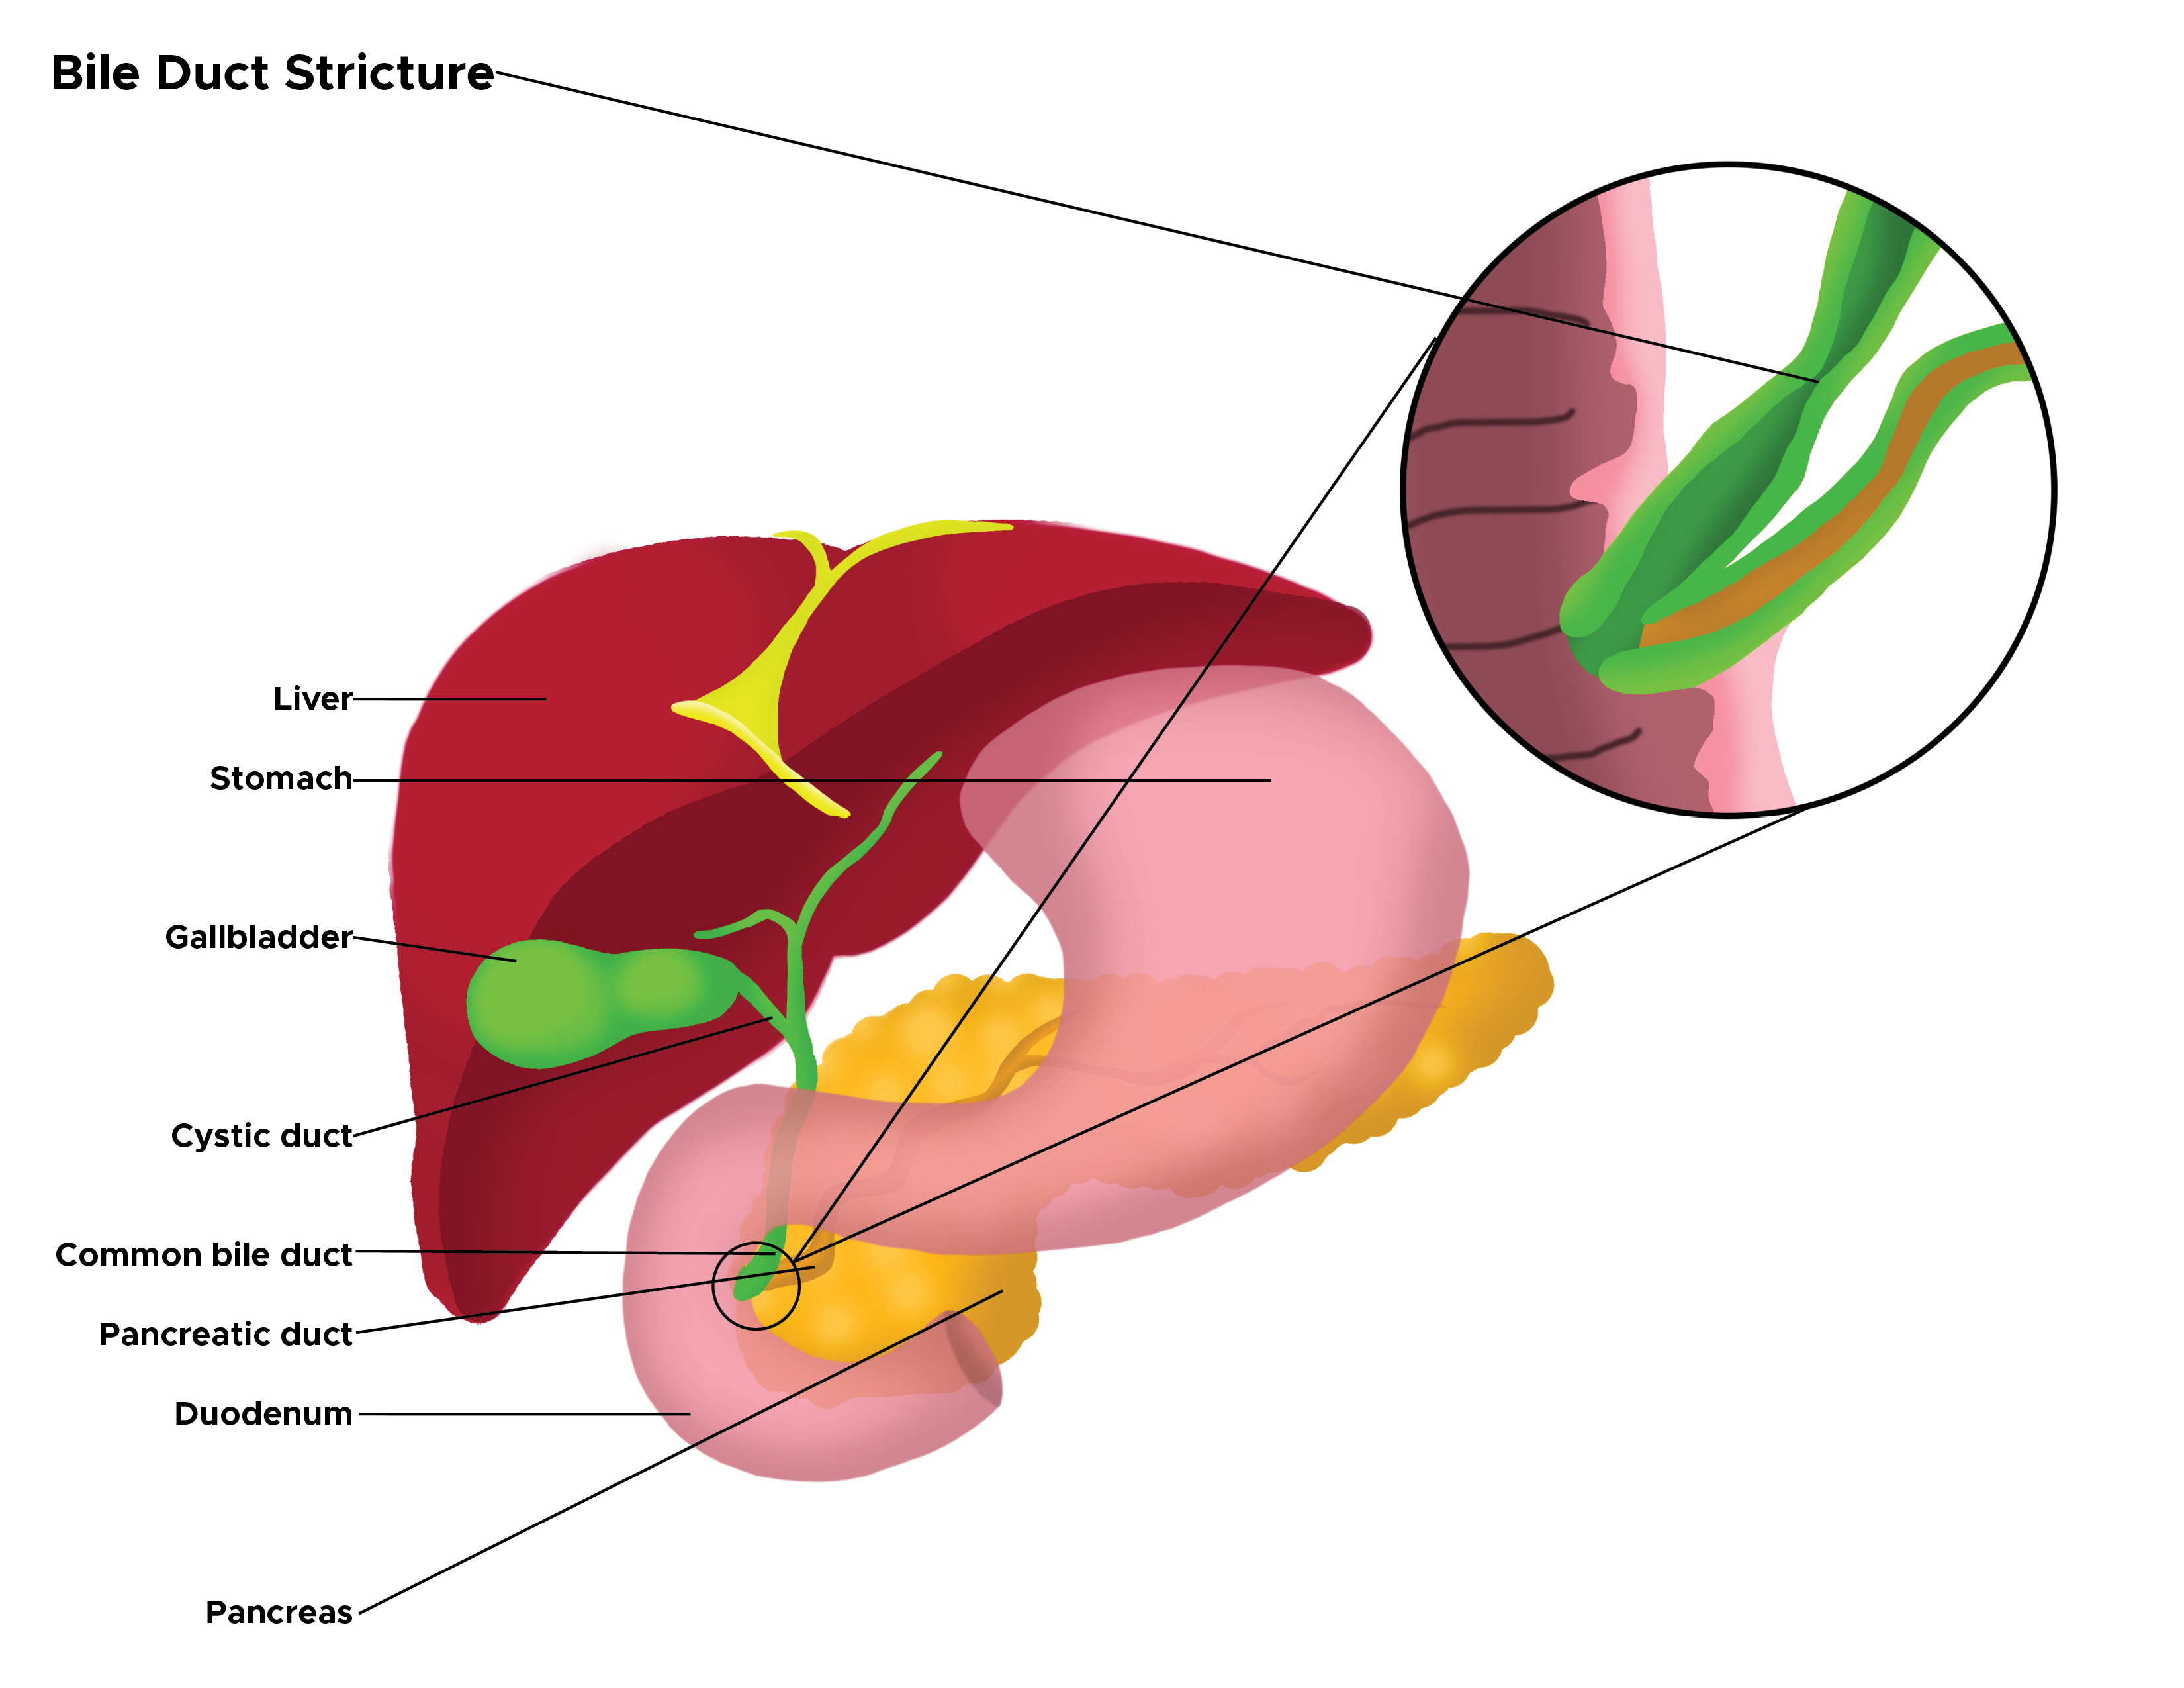 <p>Illustration of Bile Duct Stricture